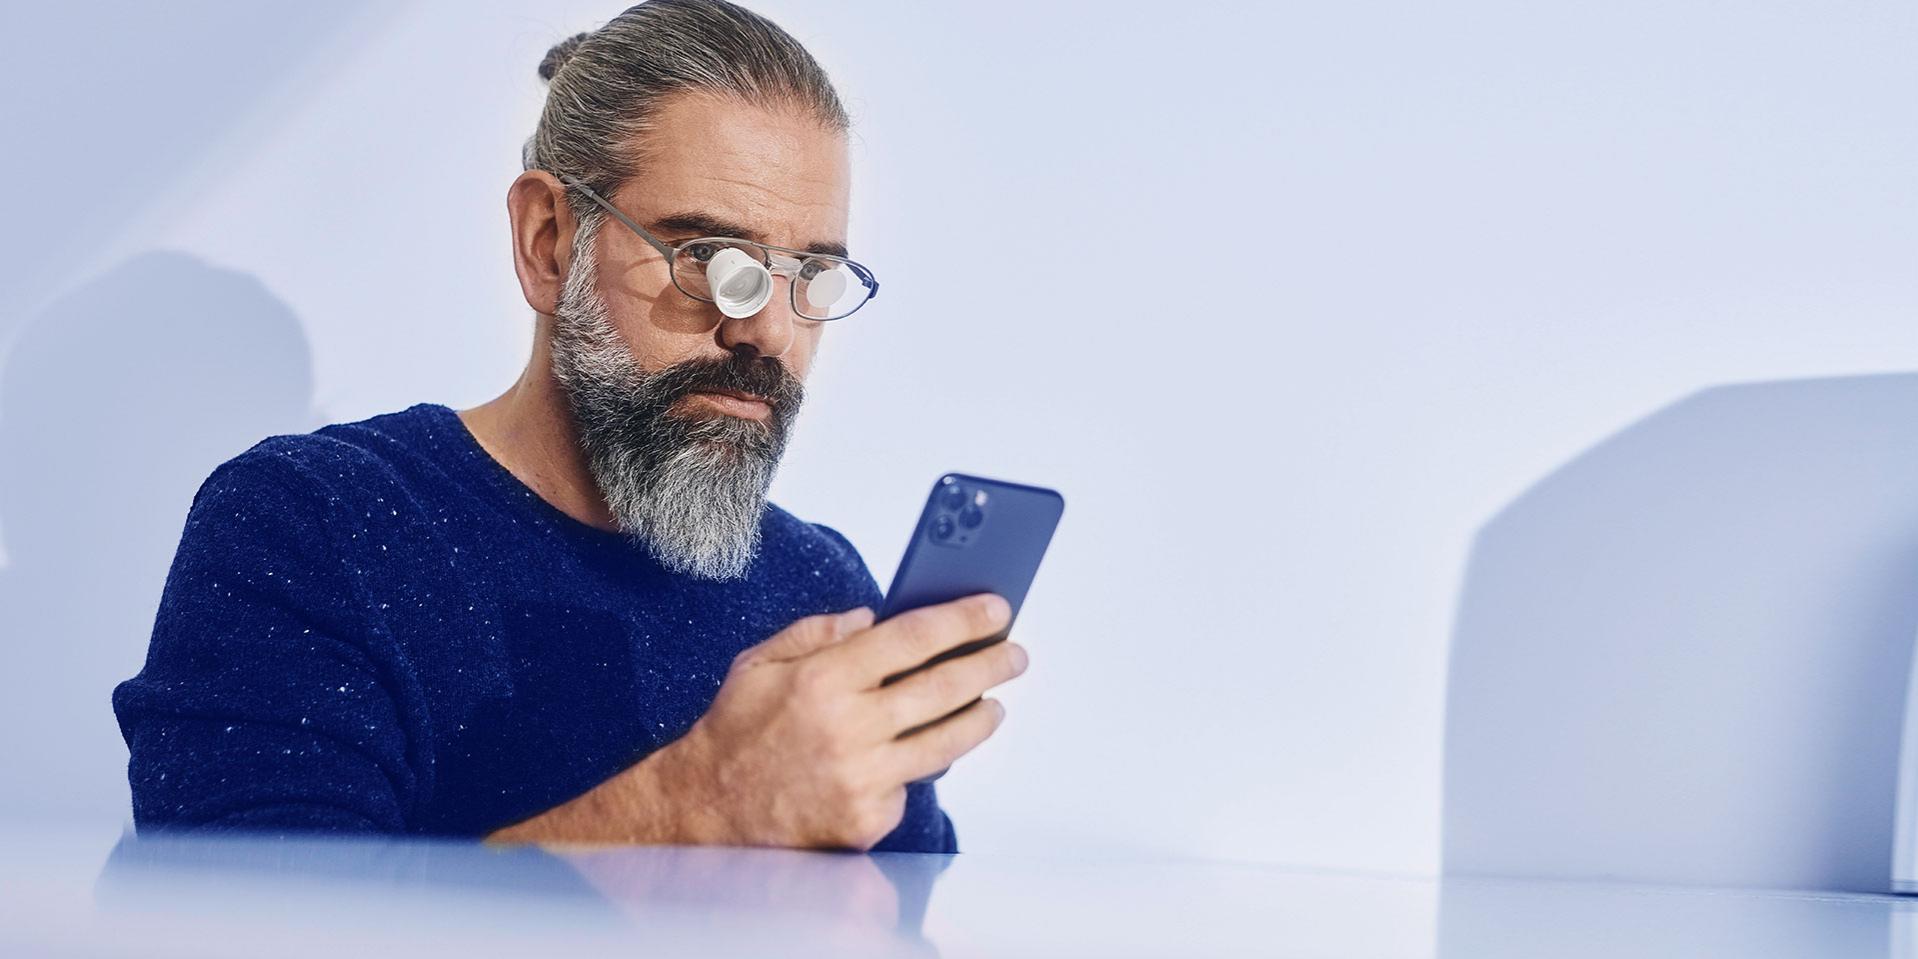 A man checks mobil phone and wears eye glasses with an inetgrated loupe.